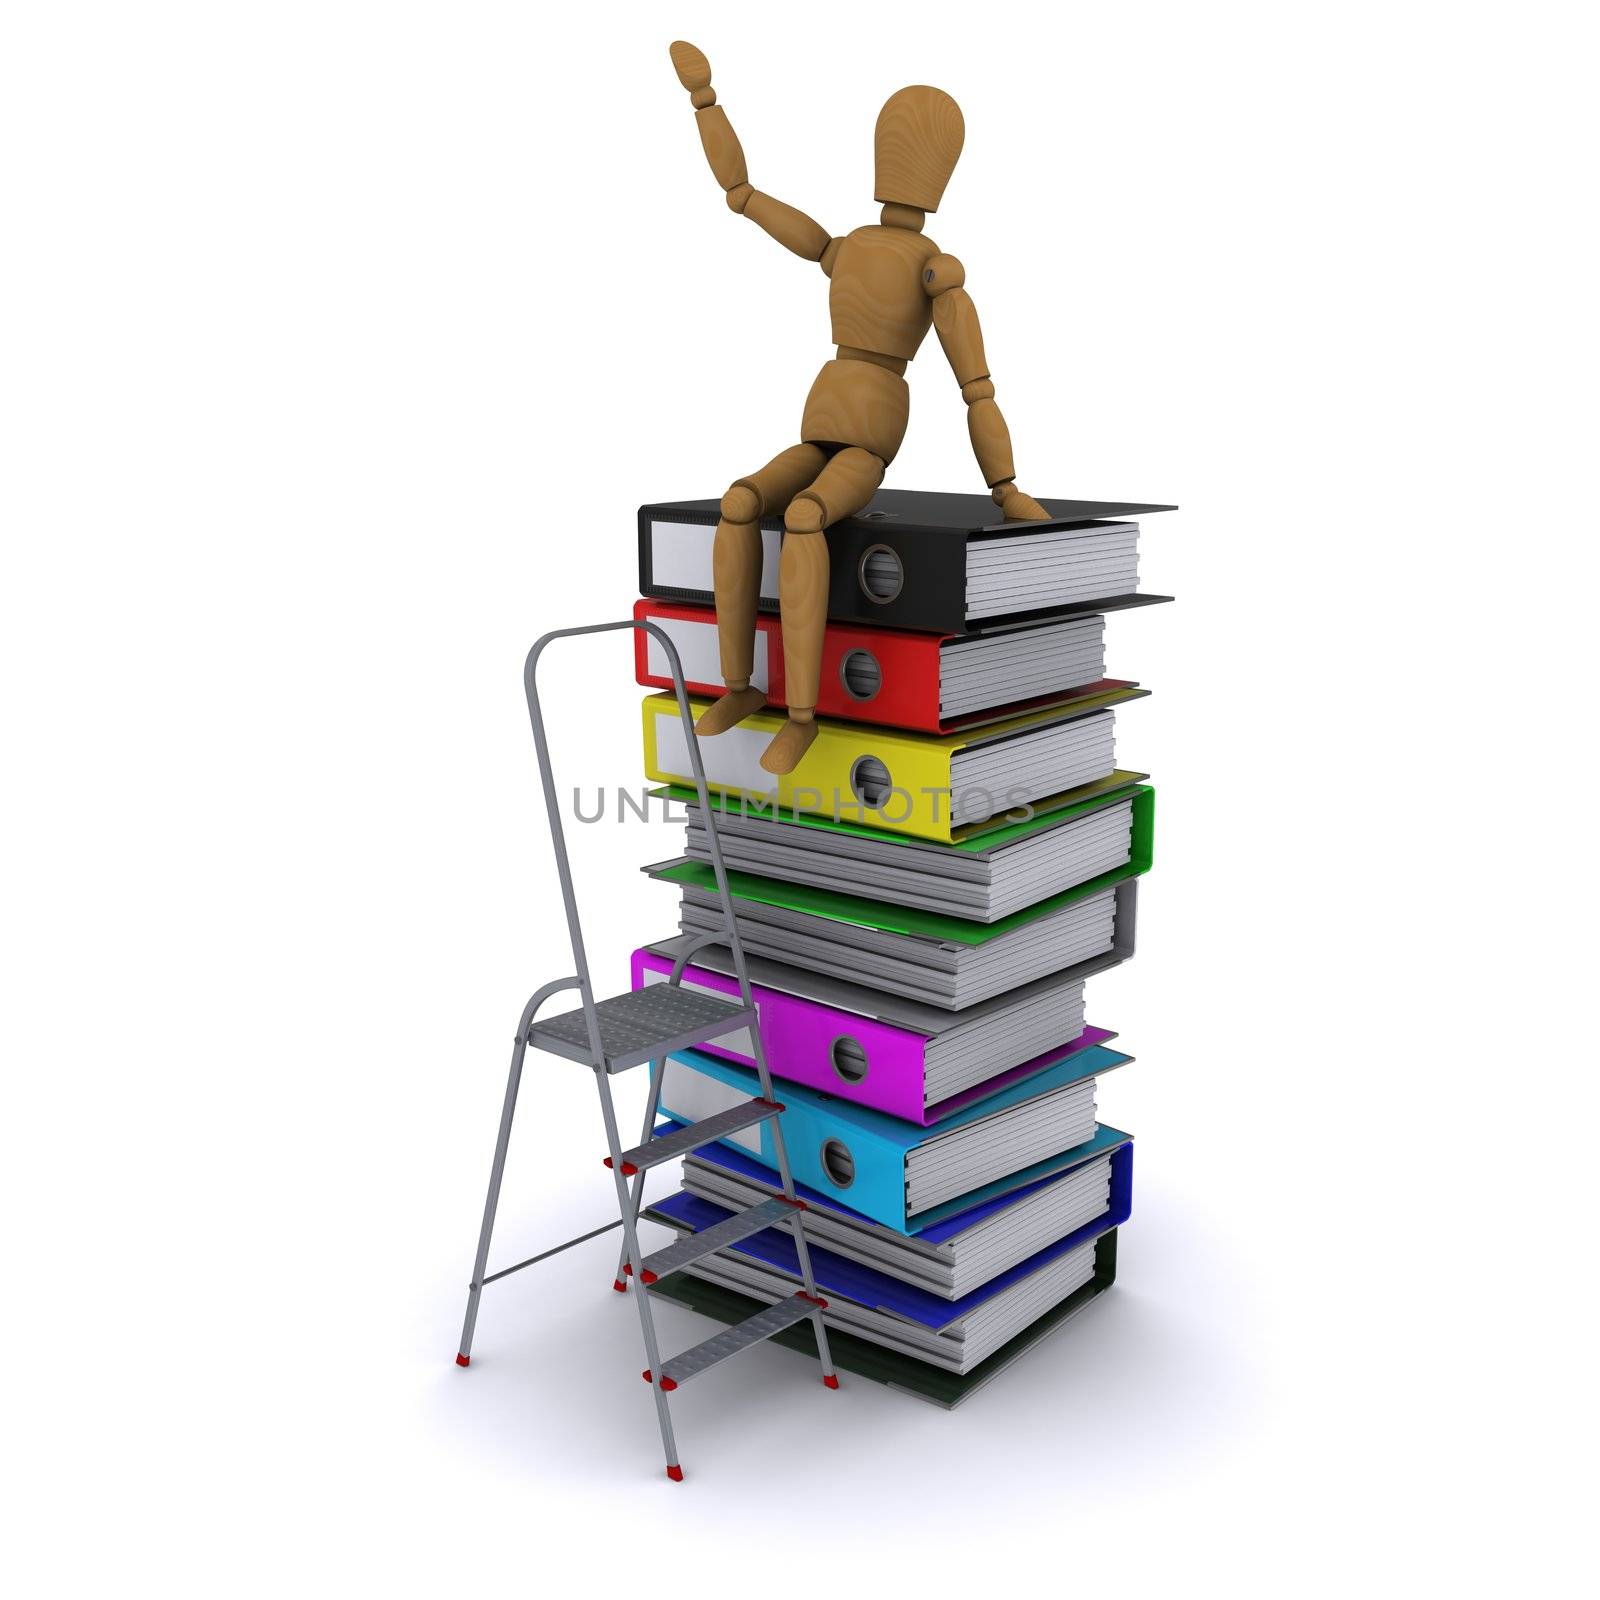 The wooden man climbed the ladder on the stack of books. 3D rendering by cherezoff